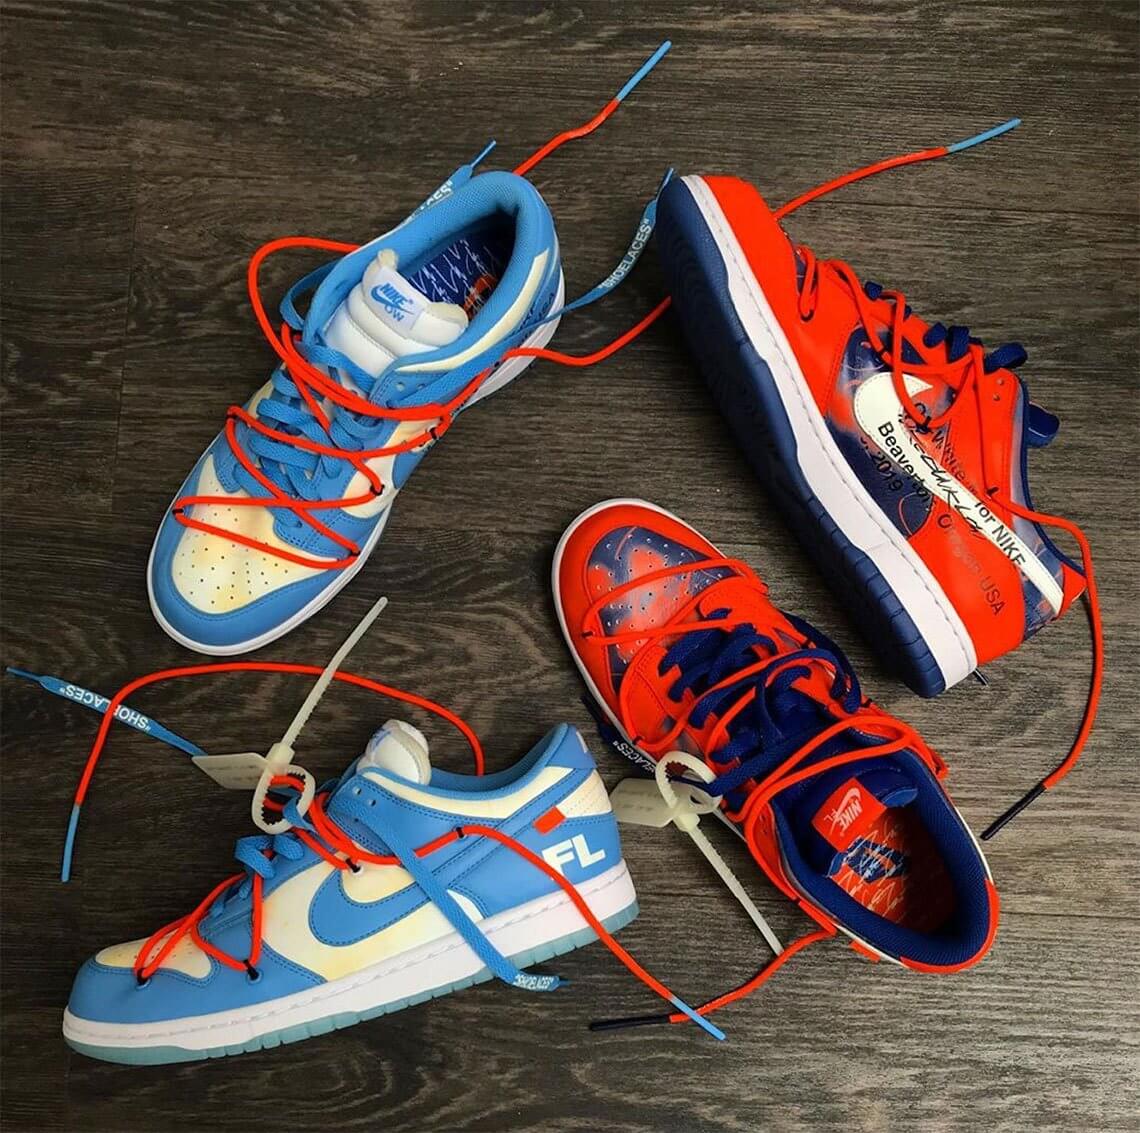 Nike x off-white dunk low 27.5cm